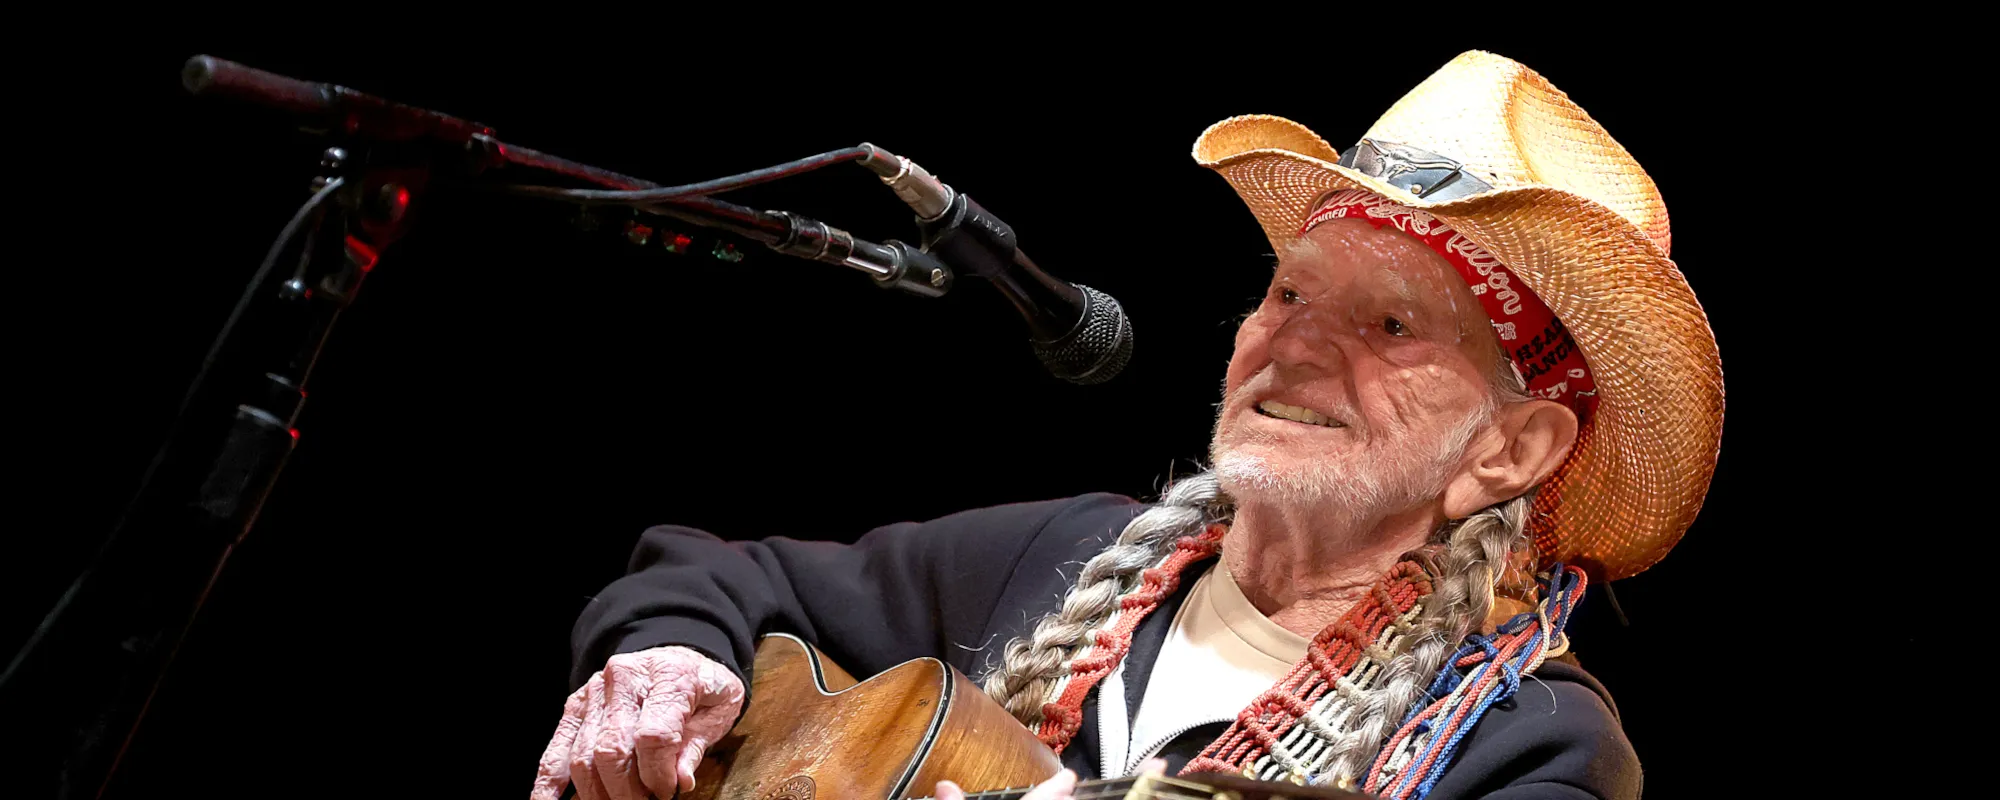 Review: Willie Nelson’s New Album ‘Bluegrass’ is a Romp